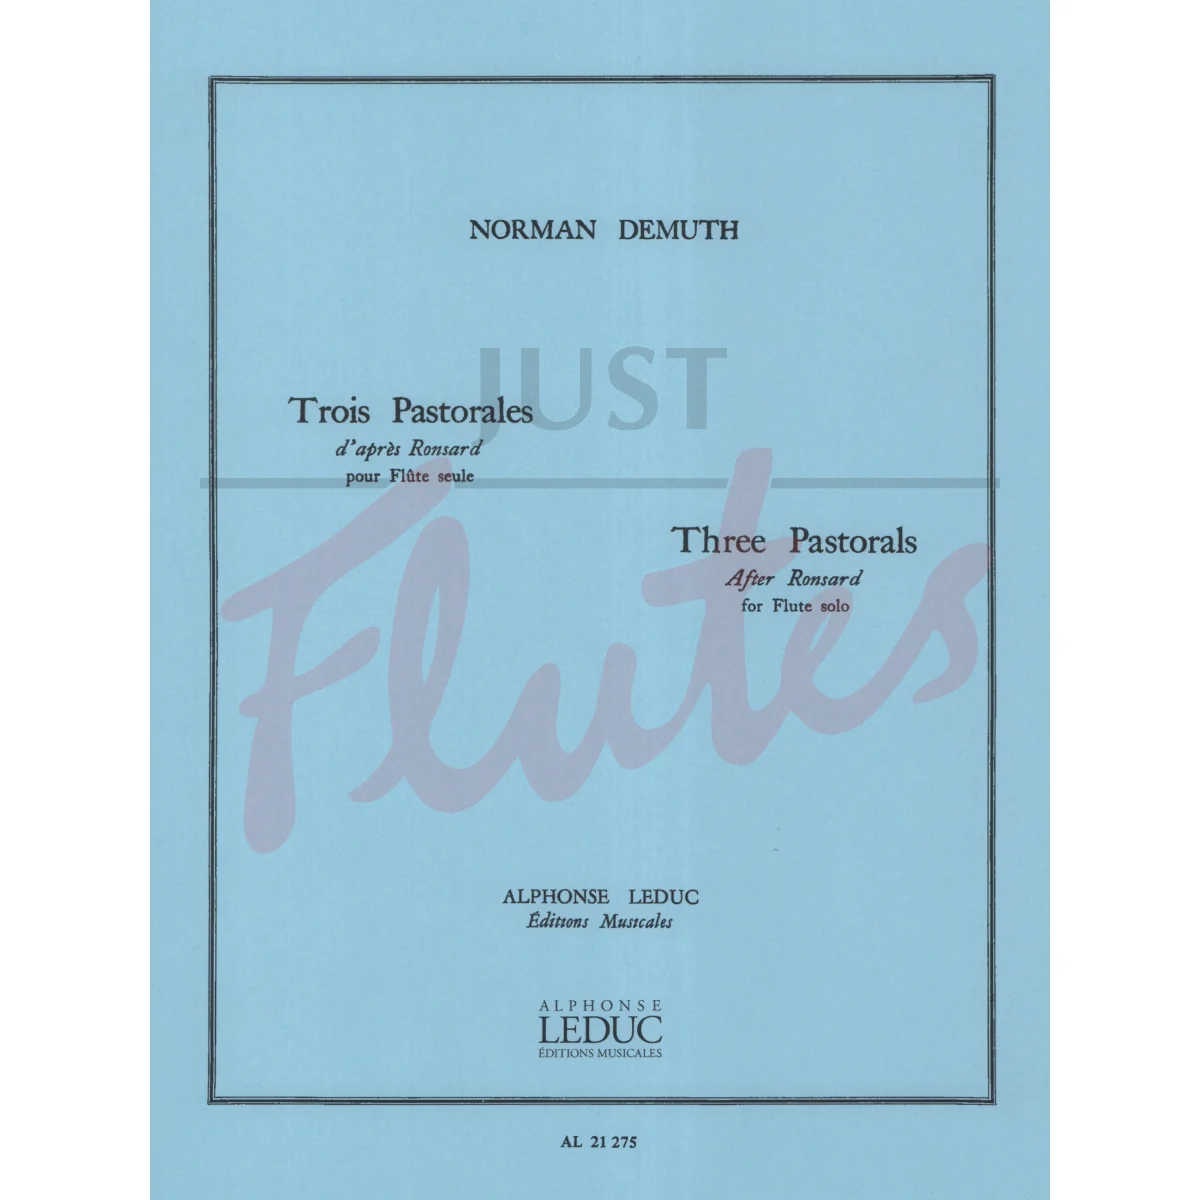 Three Pastorales after Ronsard for Solo Flute